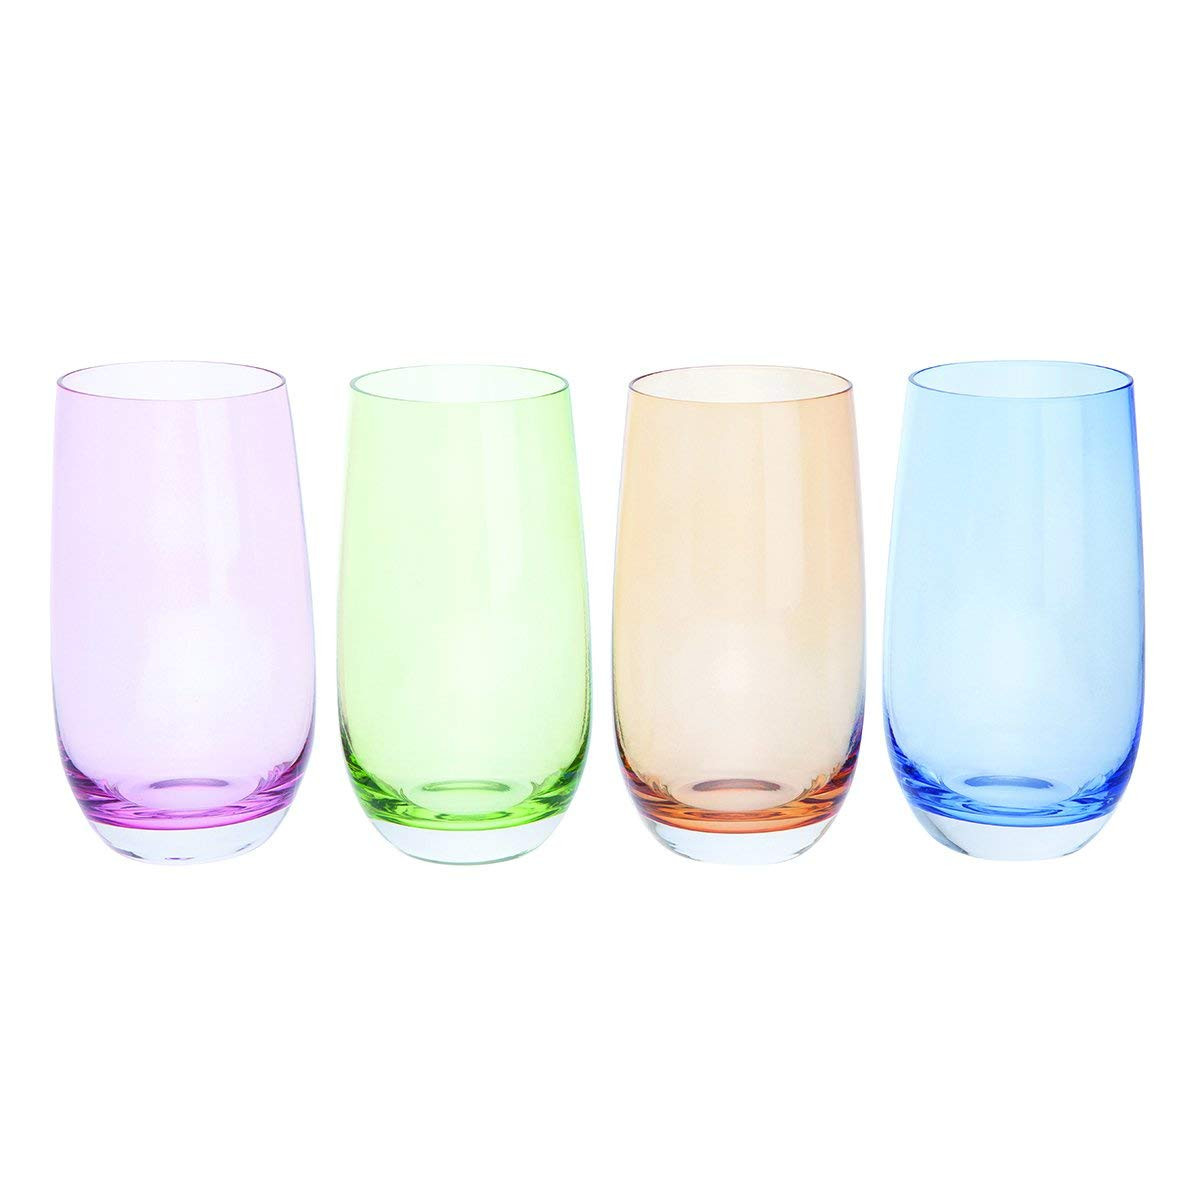 28 Awesome Large Round Clear Glass Vase 2023 free download large round clear glass vase of dartington crystal tall large seahorse glass vase wedding home party with regard to pack of 4 dartington crystal spangle highball coloured drinking glasses 49